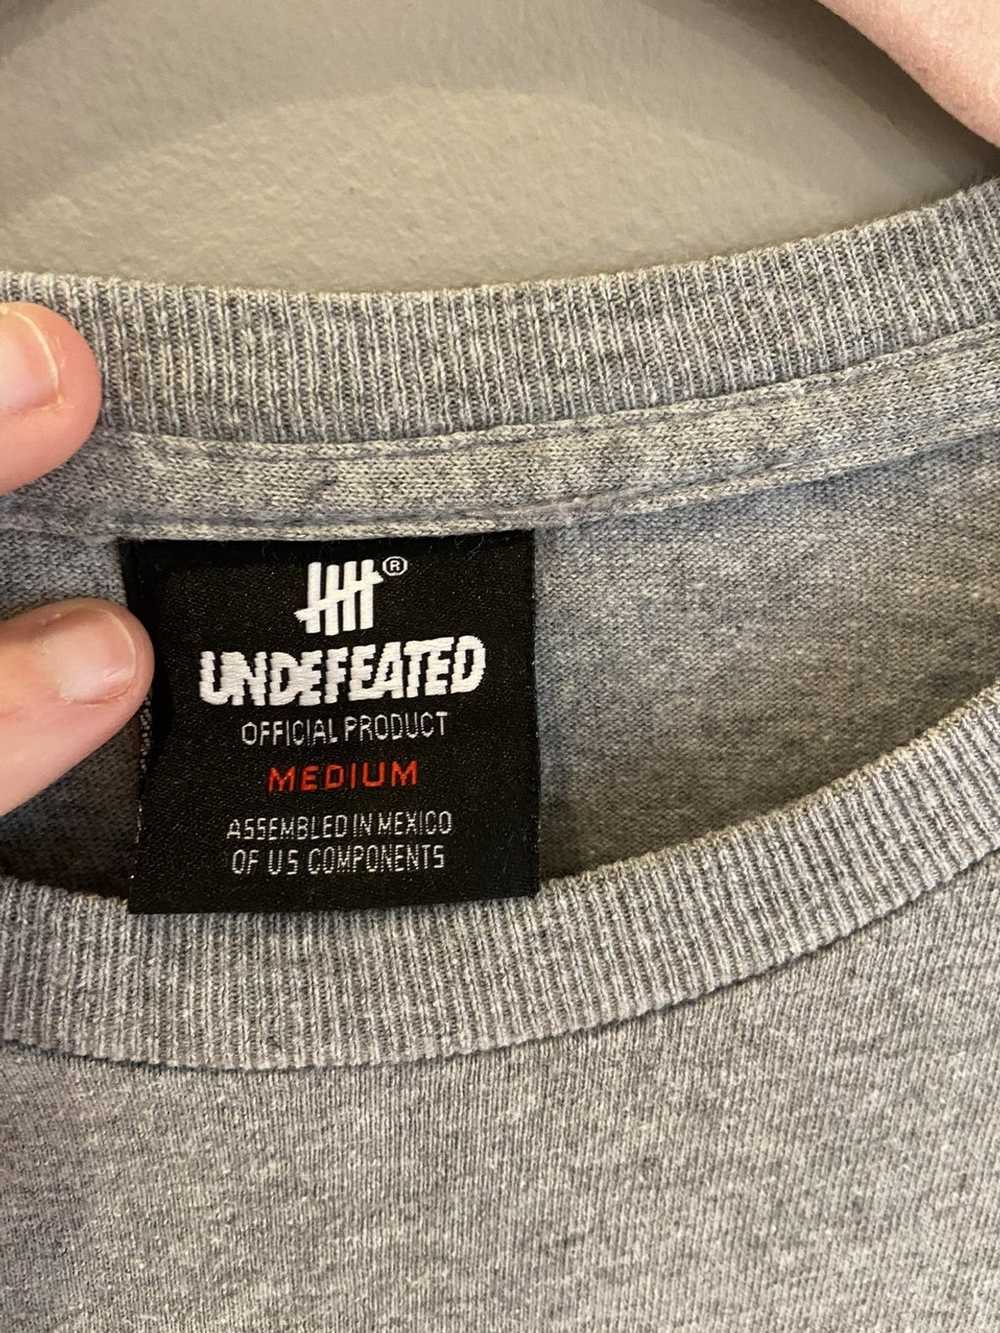 Undefeated Vintage Undefeated Gray M Soccer Tee - image 3